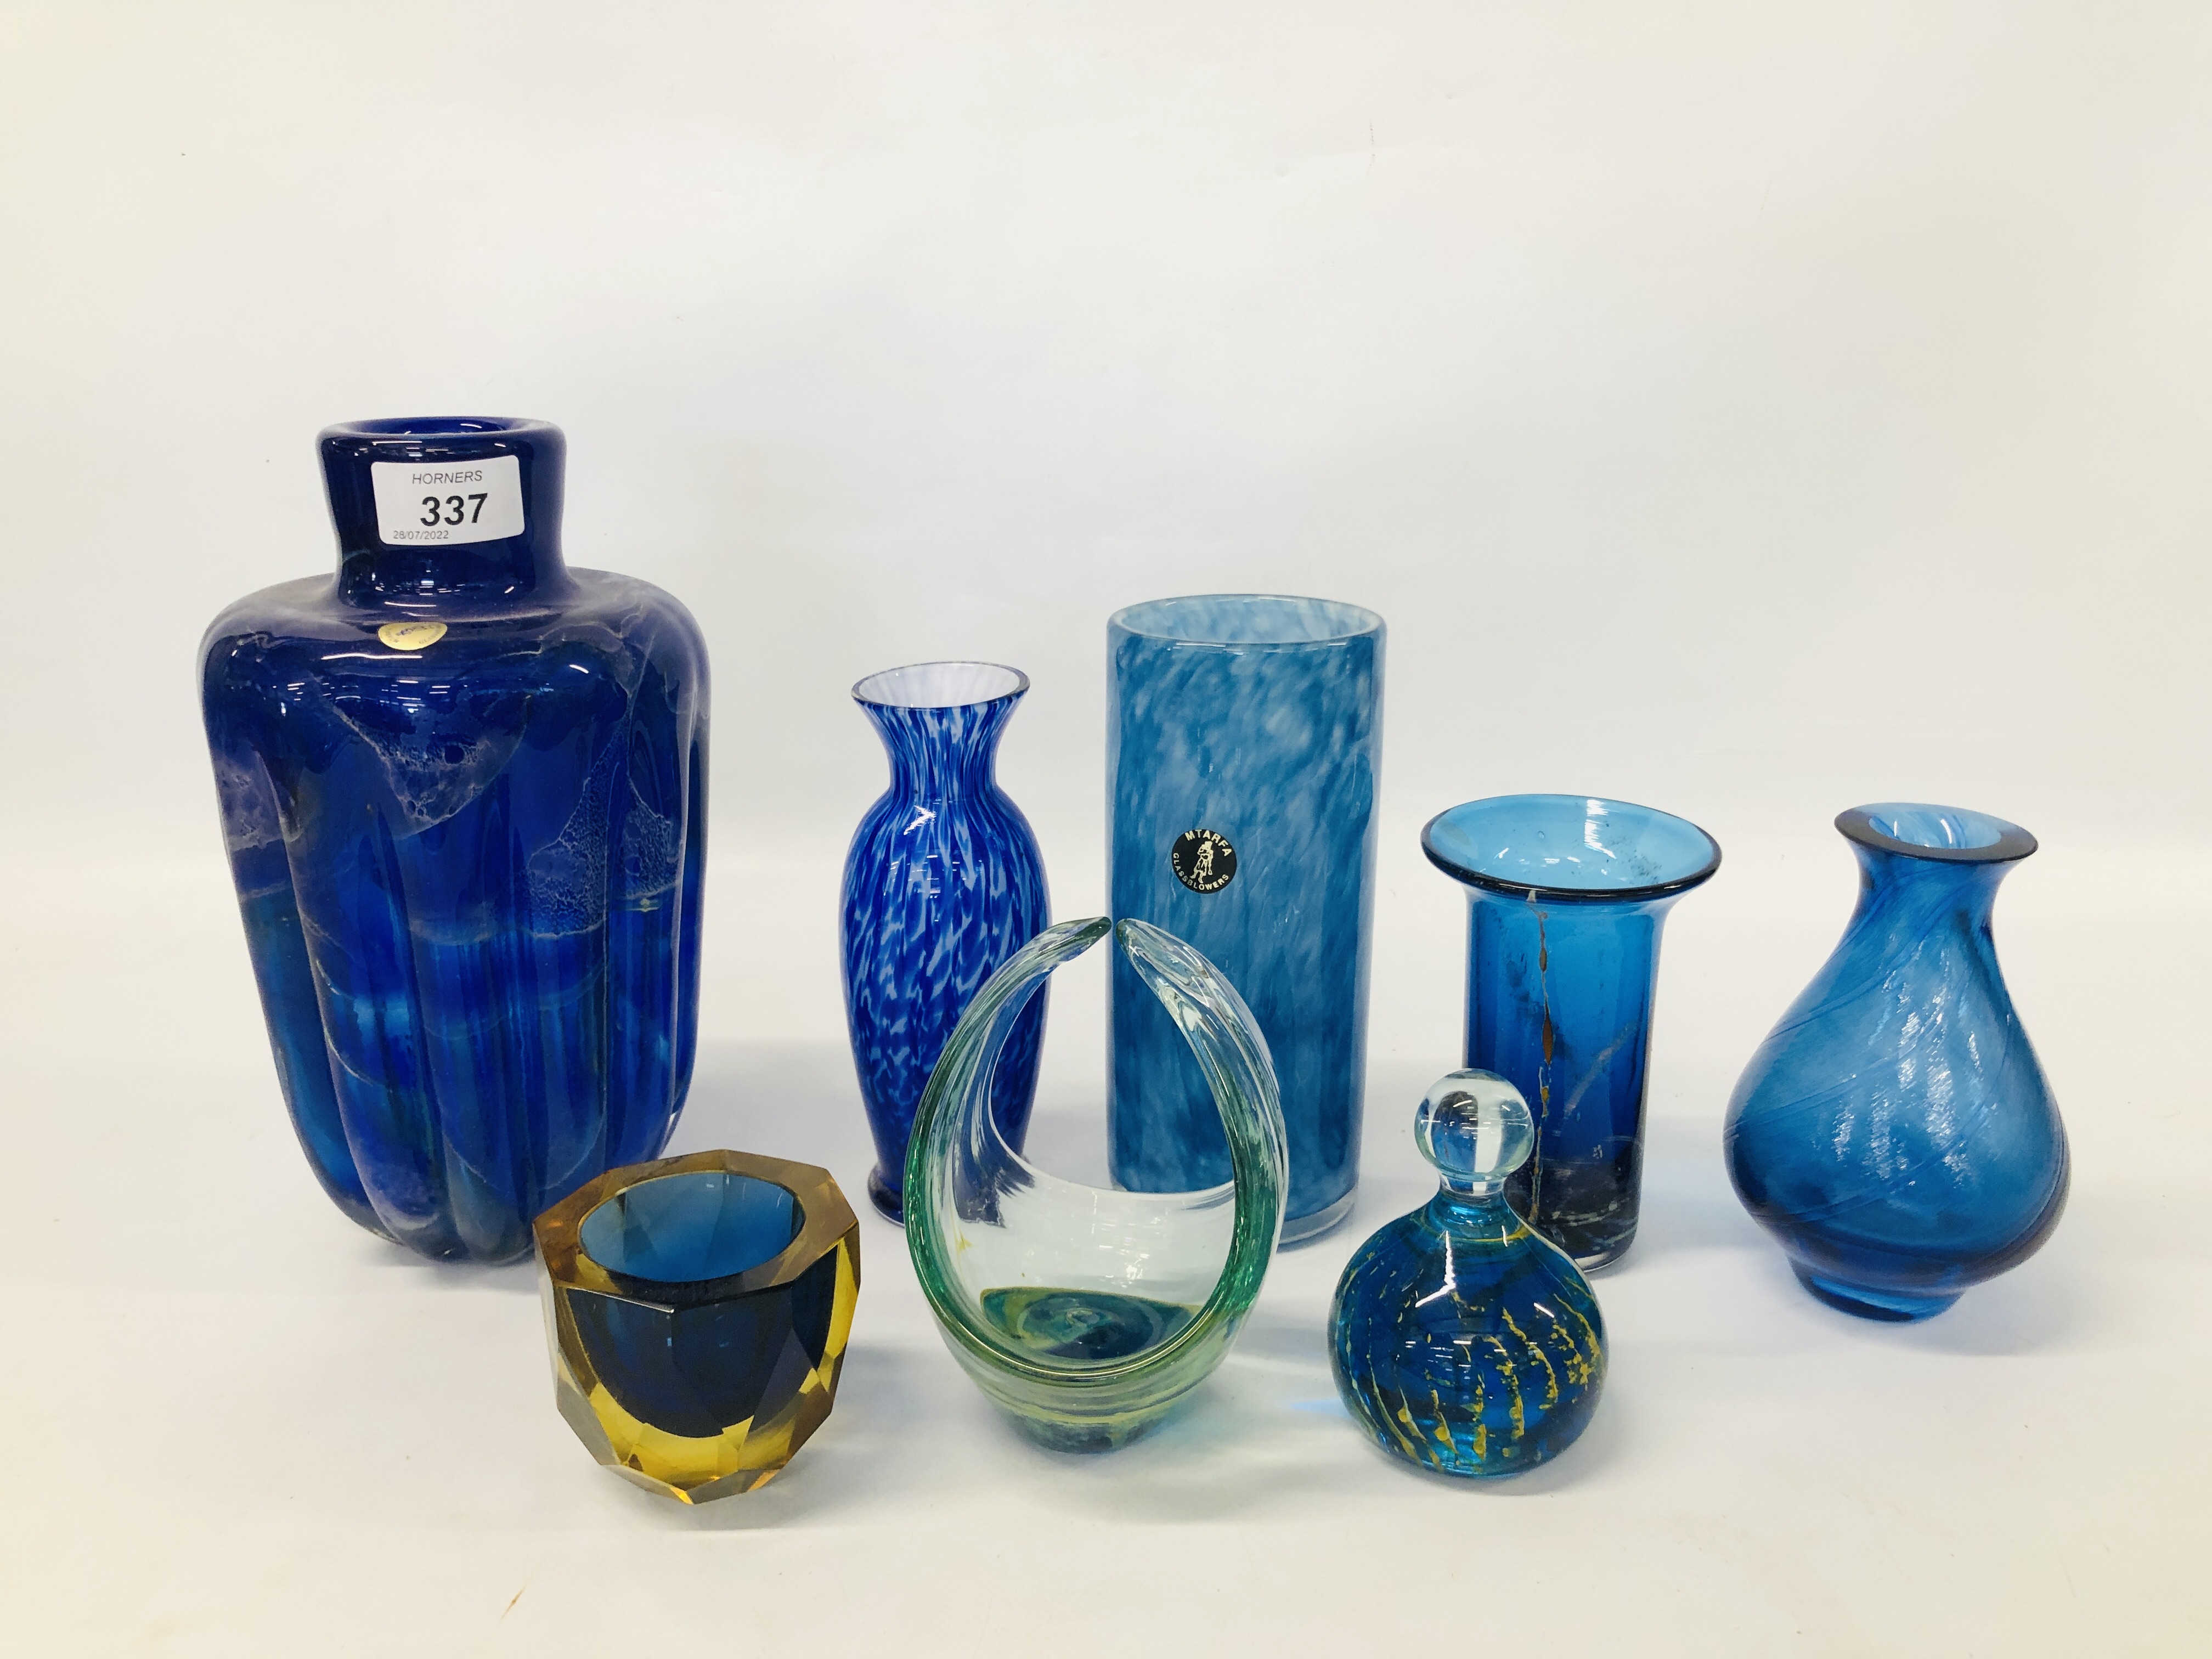 TWO 'MTARFA' ART GLASS VASES ALONG WITH THREE OTHERS UNMARKED,